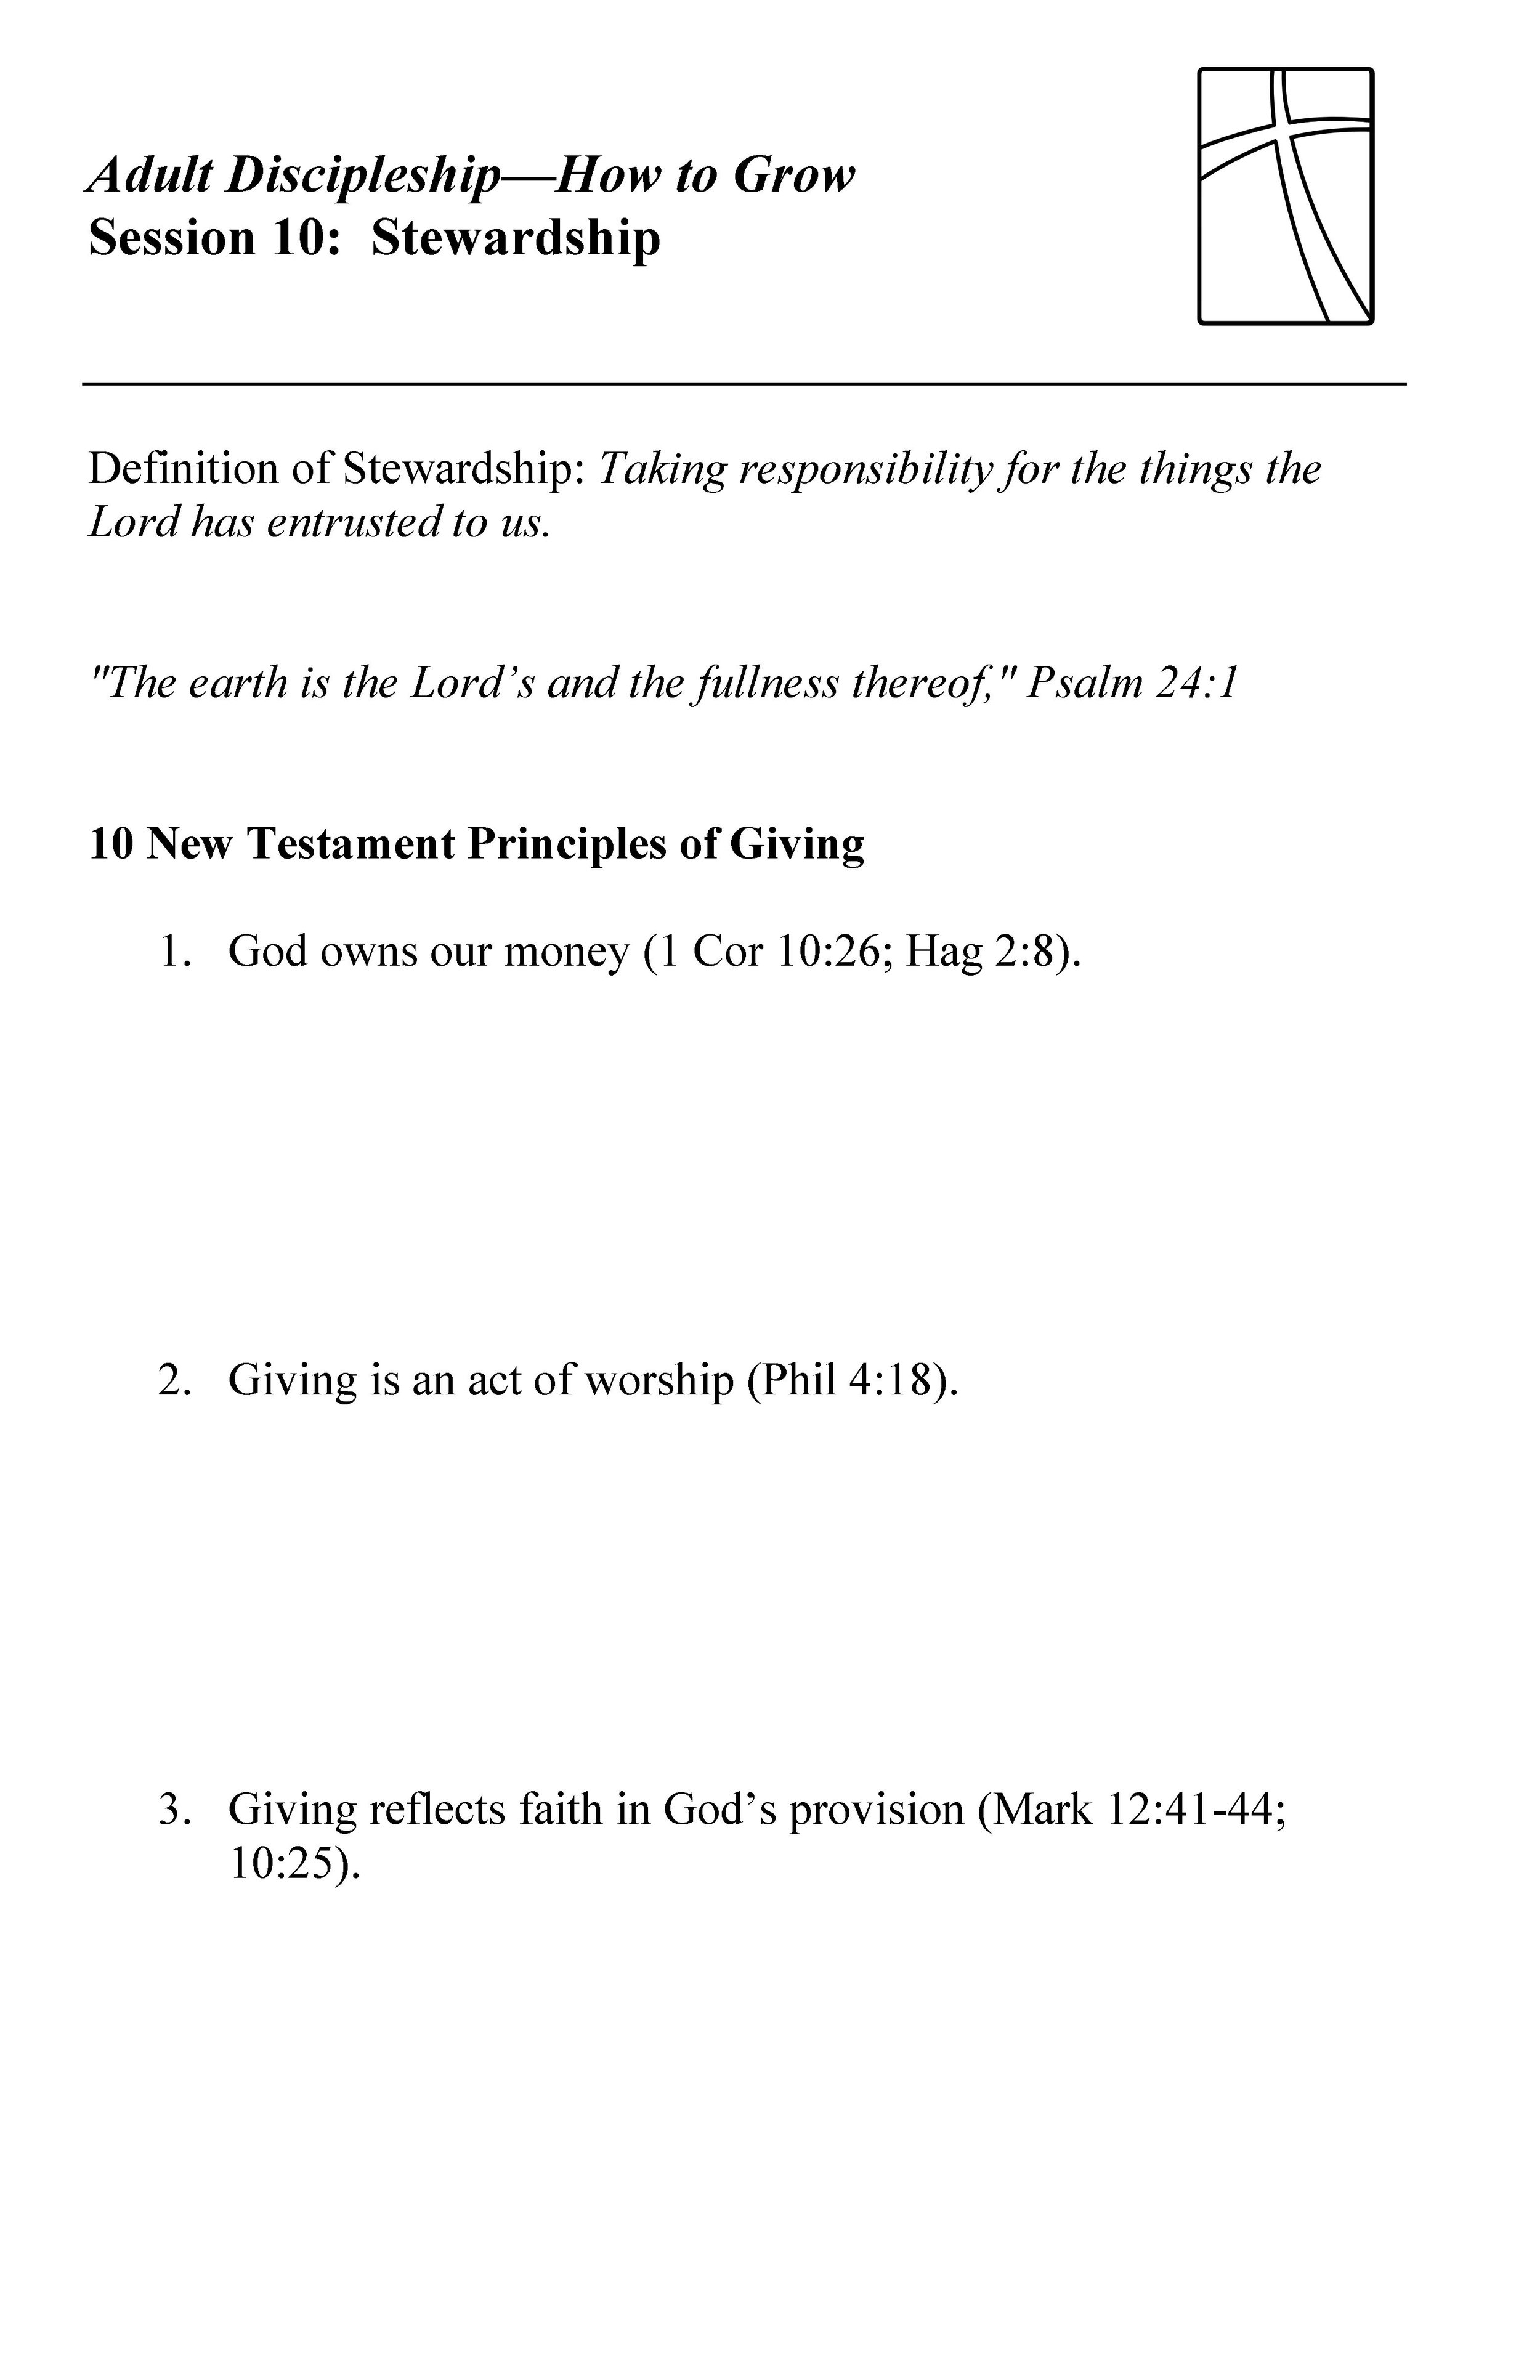 10_How To Grow_Stewardship_handout_2020_Page_1.jpg